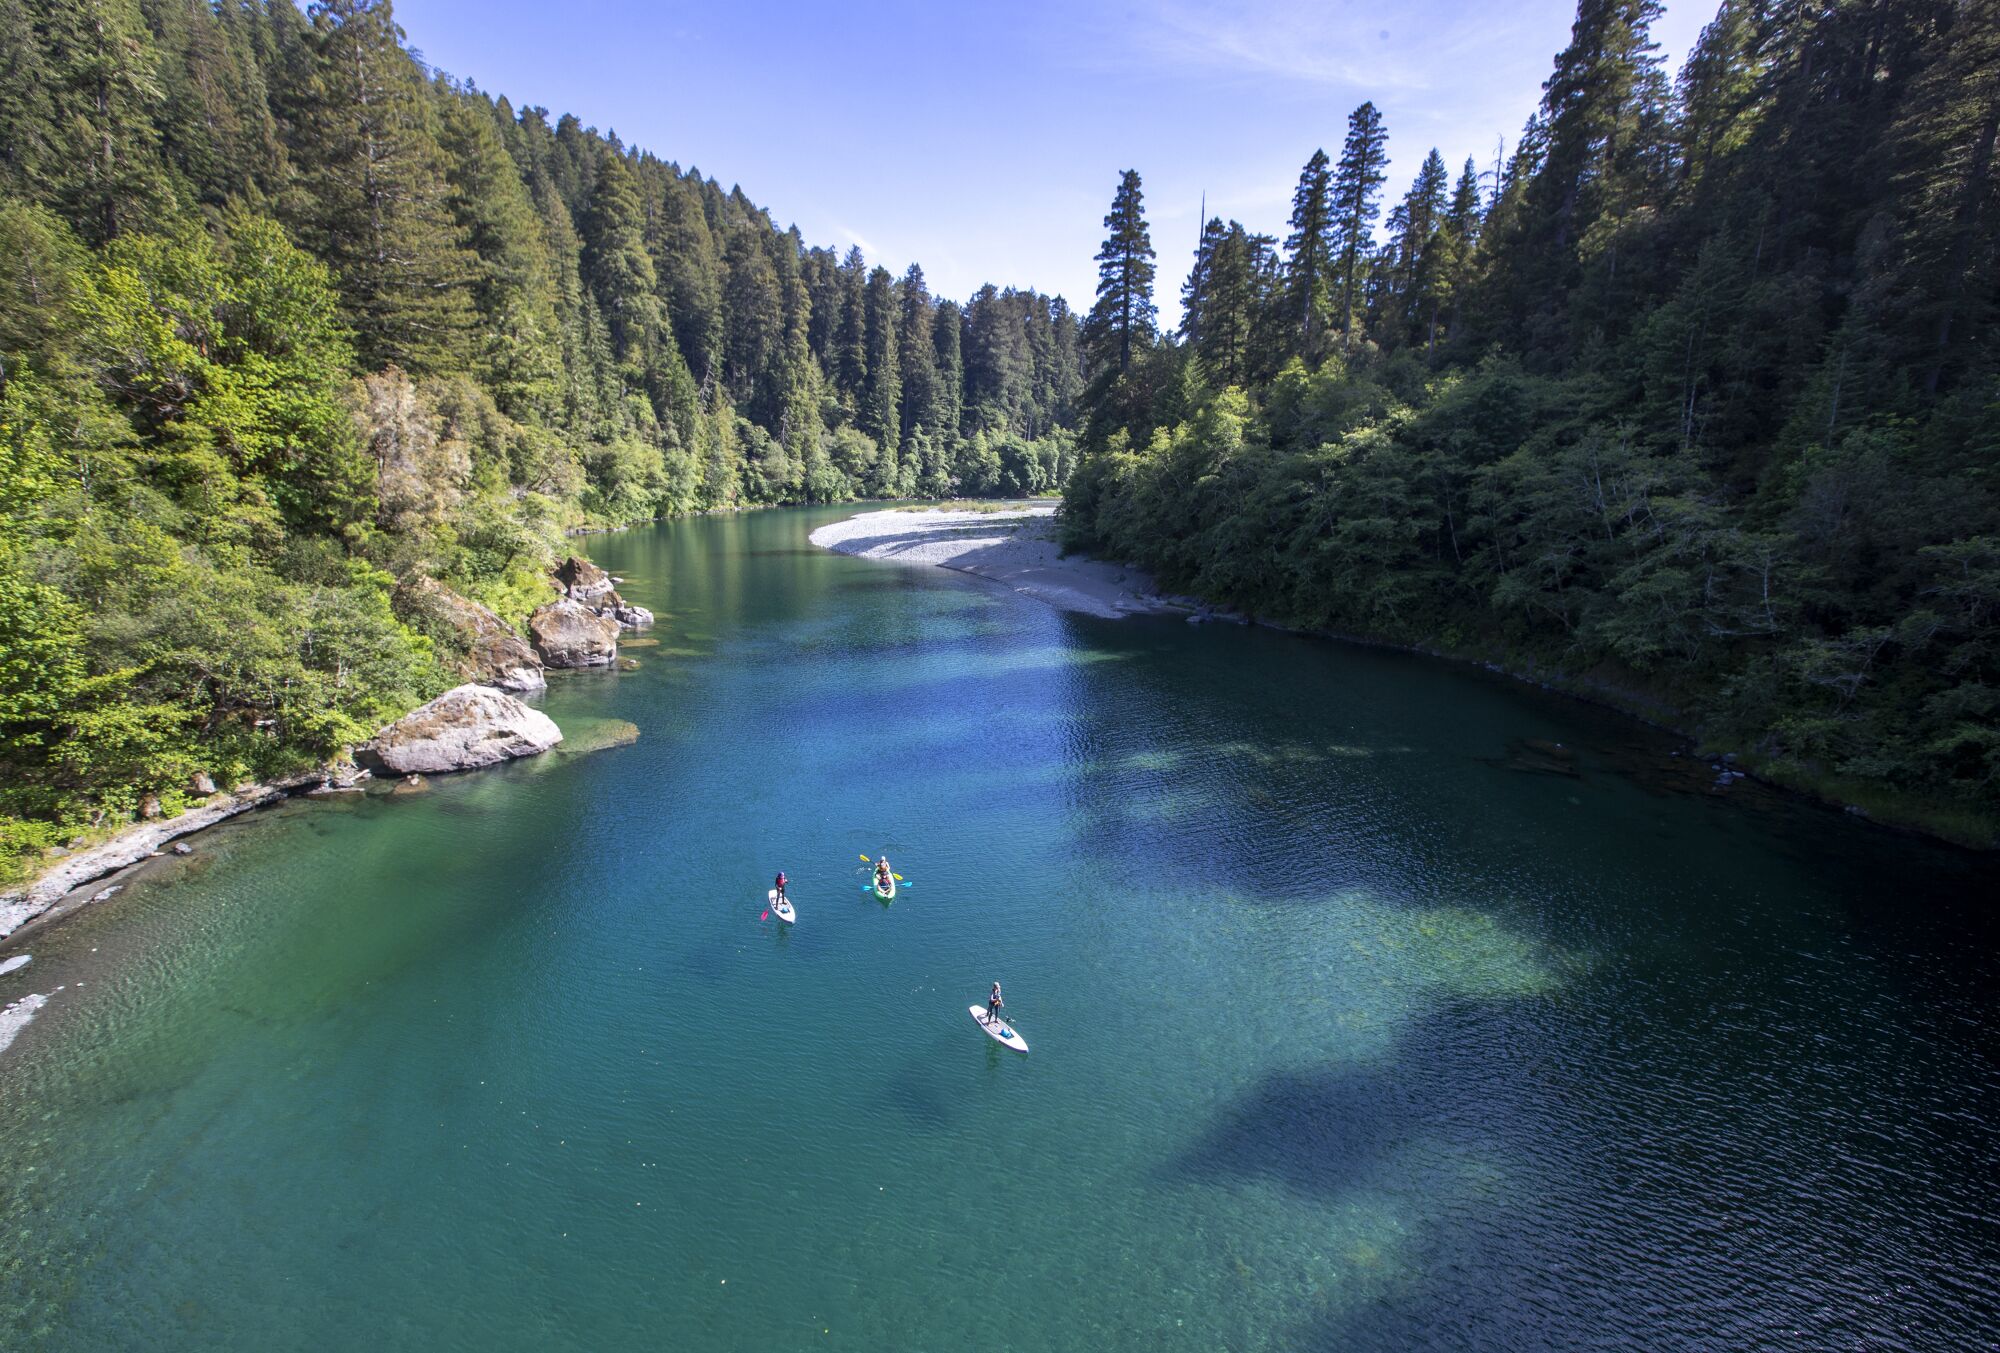 Three people on paddleboards travel down the Smith River flanked by trees